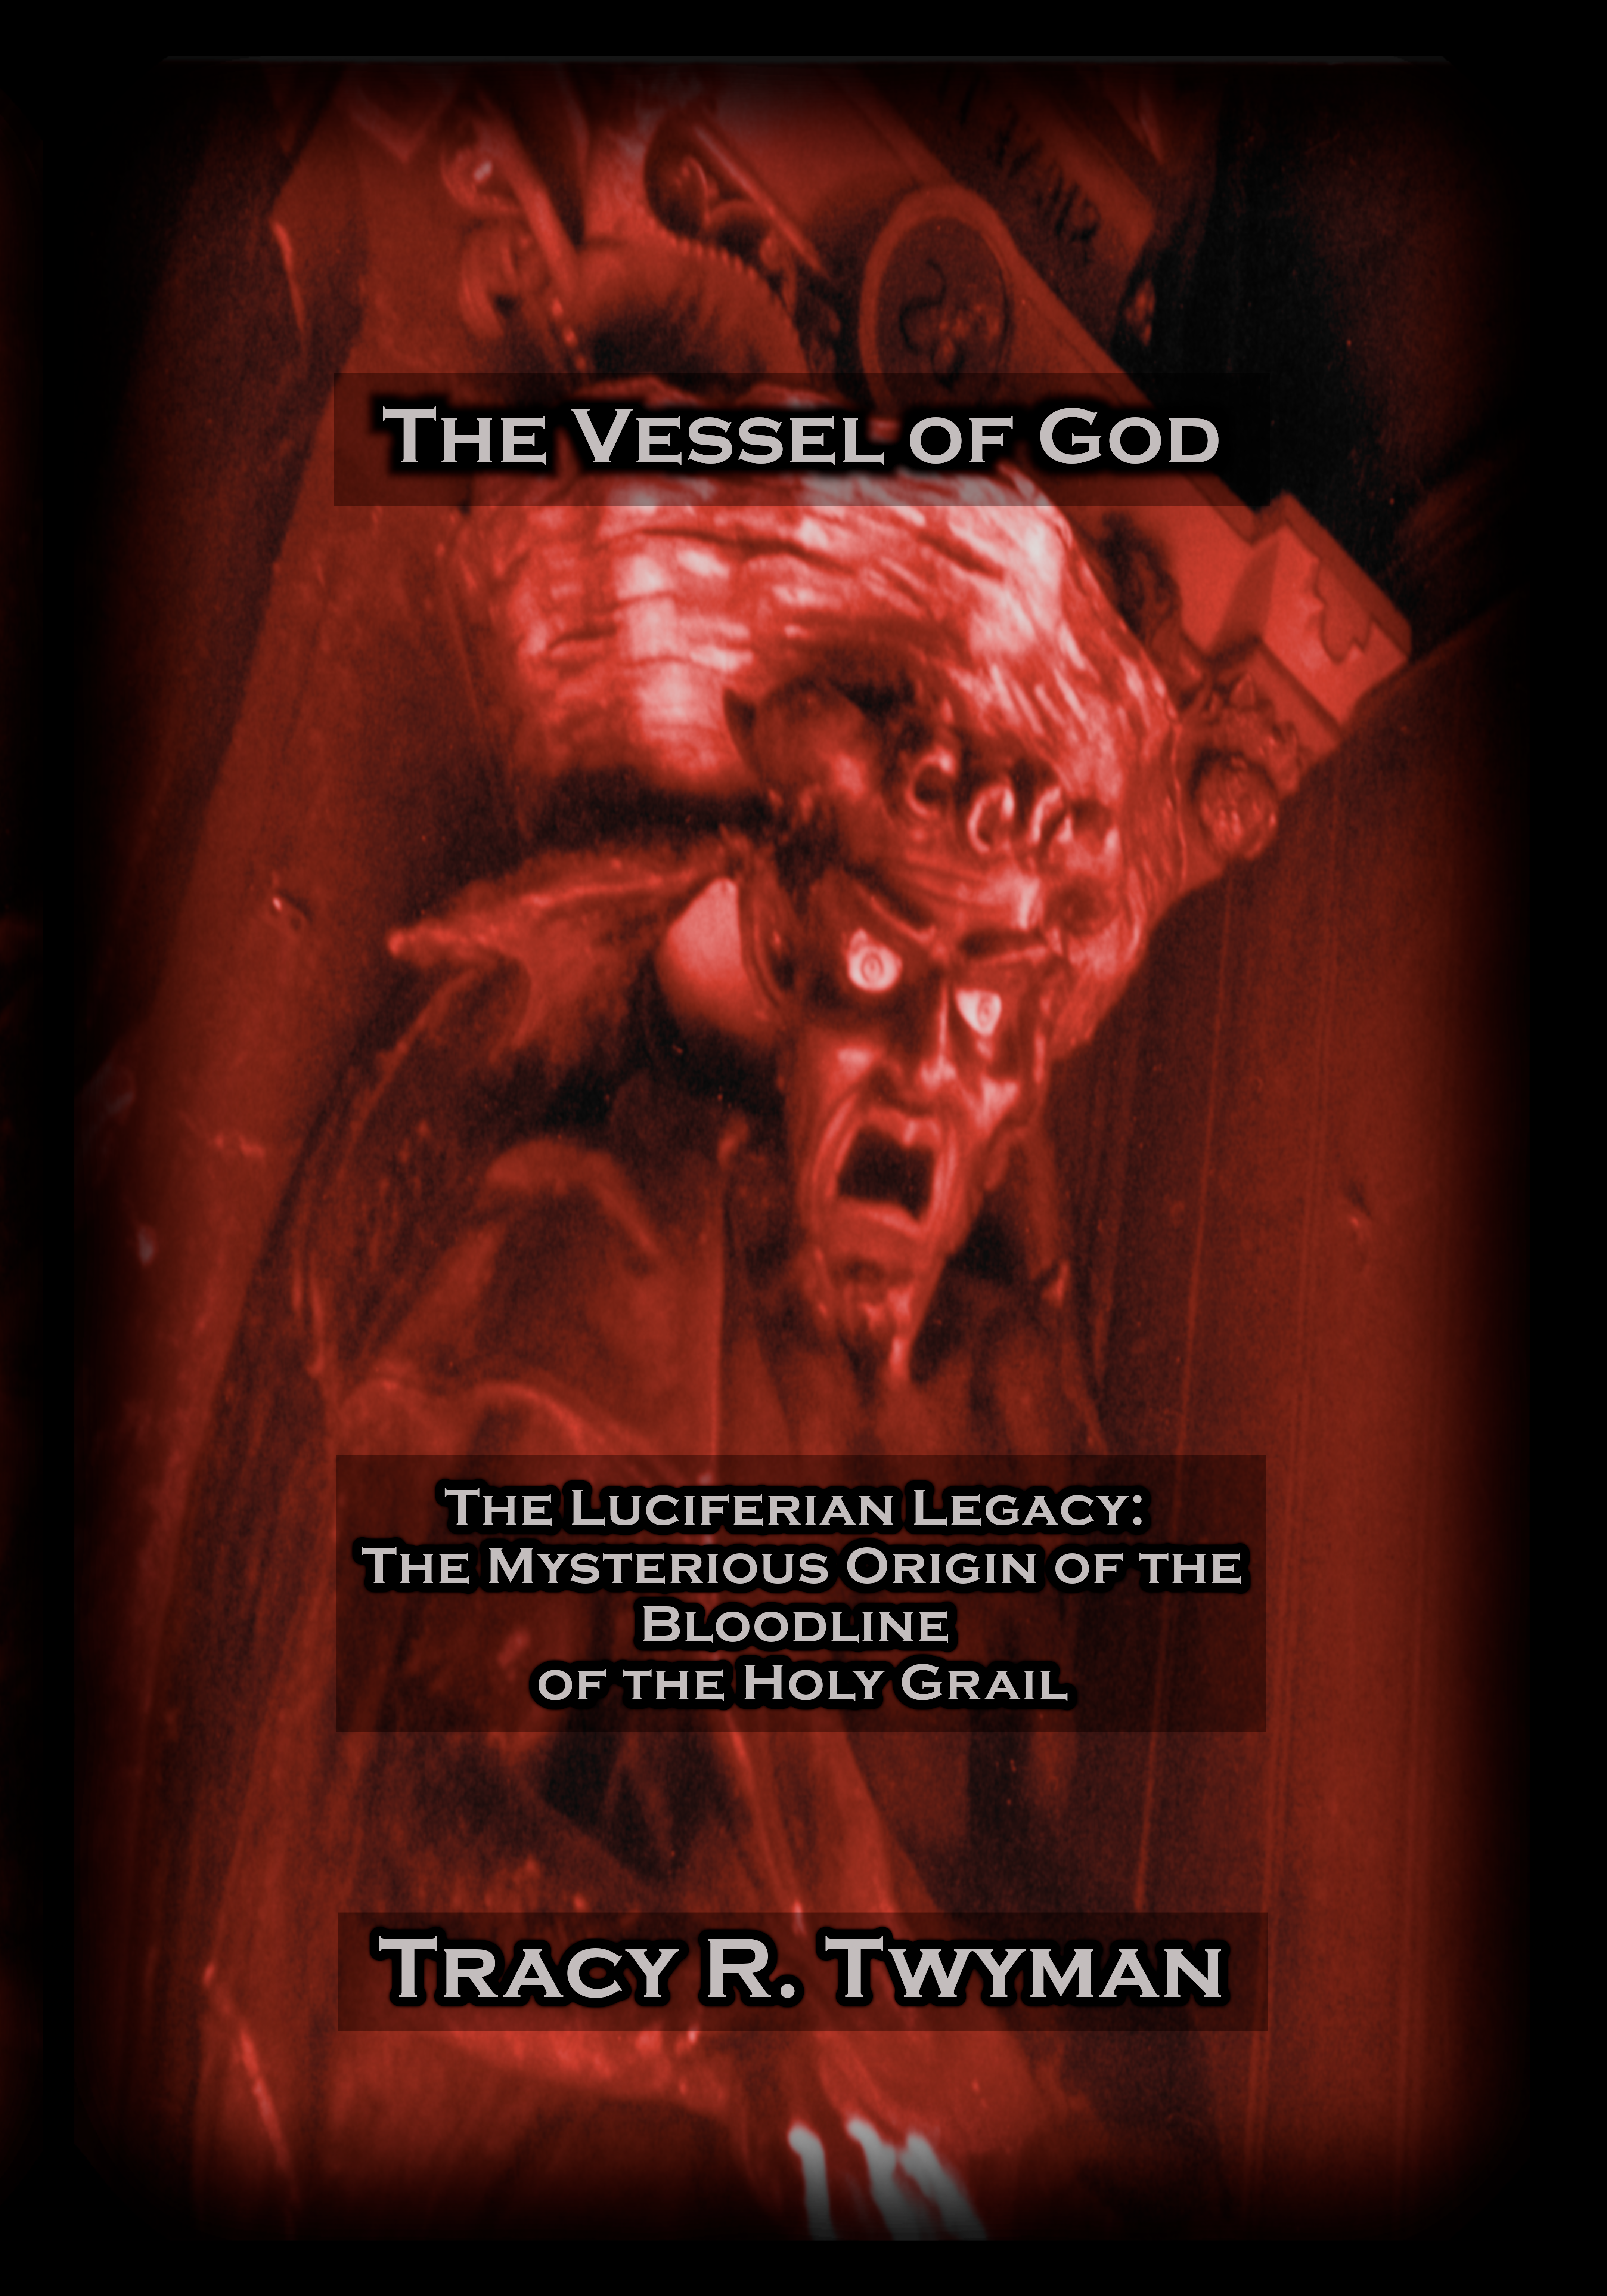 Book Cover Front: The Vessel of God: The Luciferian Legacy: The Mysterious Origin of the Bloodline of the Holy Grail by Tracy Twyman